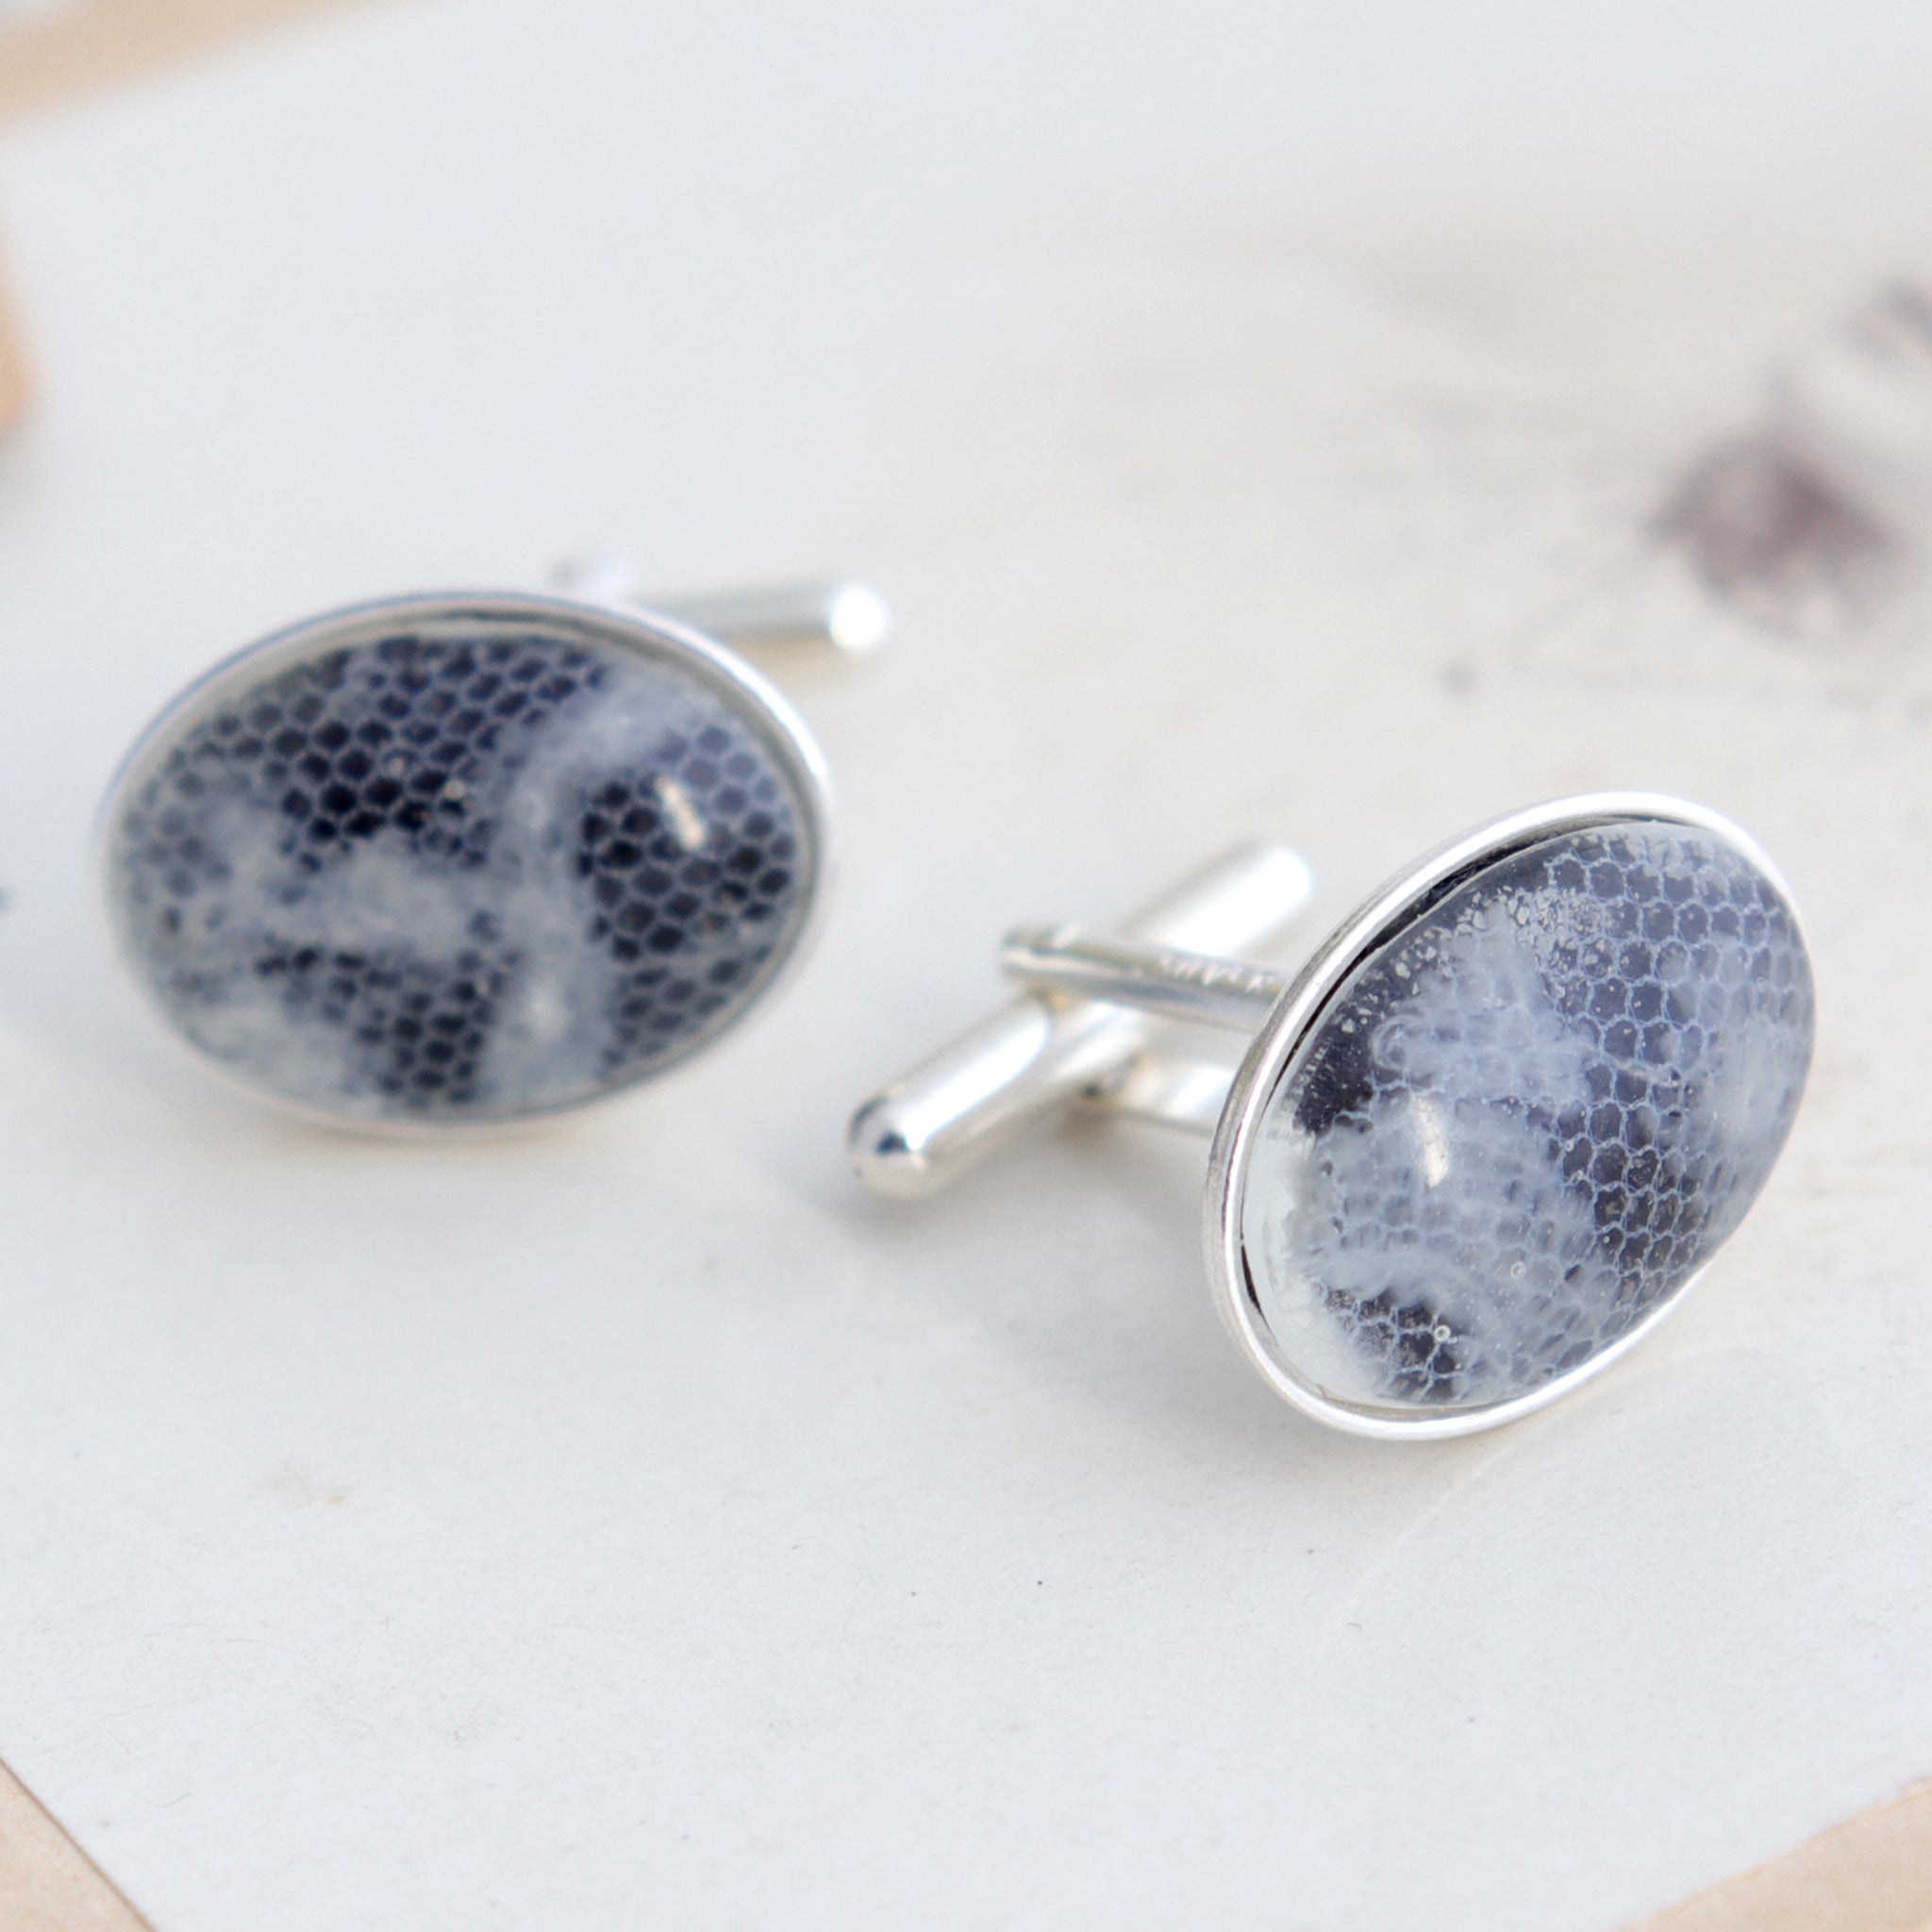 Sterling silver cufflinks with resin beads featuring lace from a bride's wedding dress